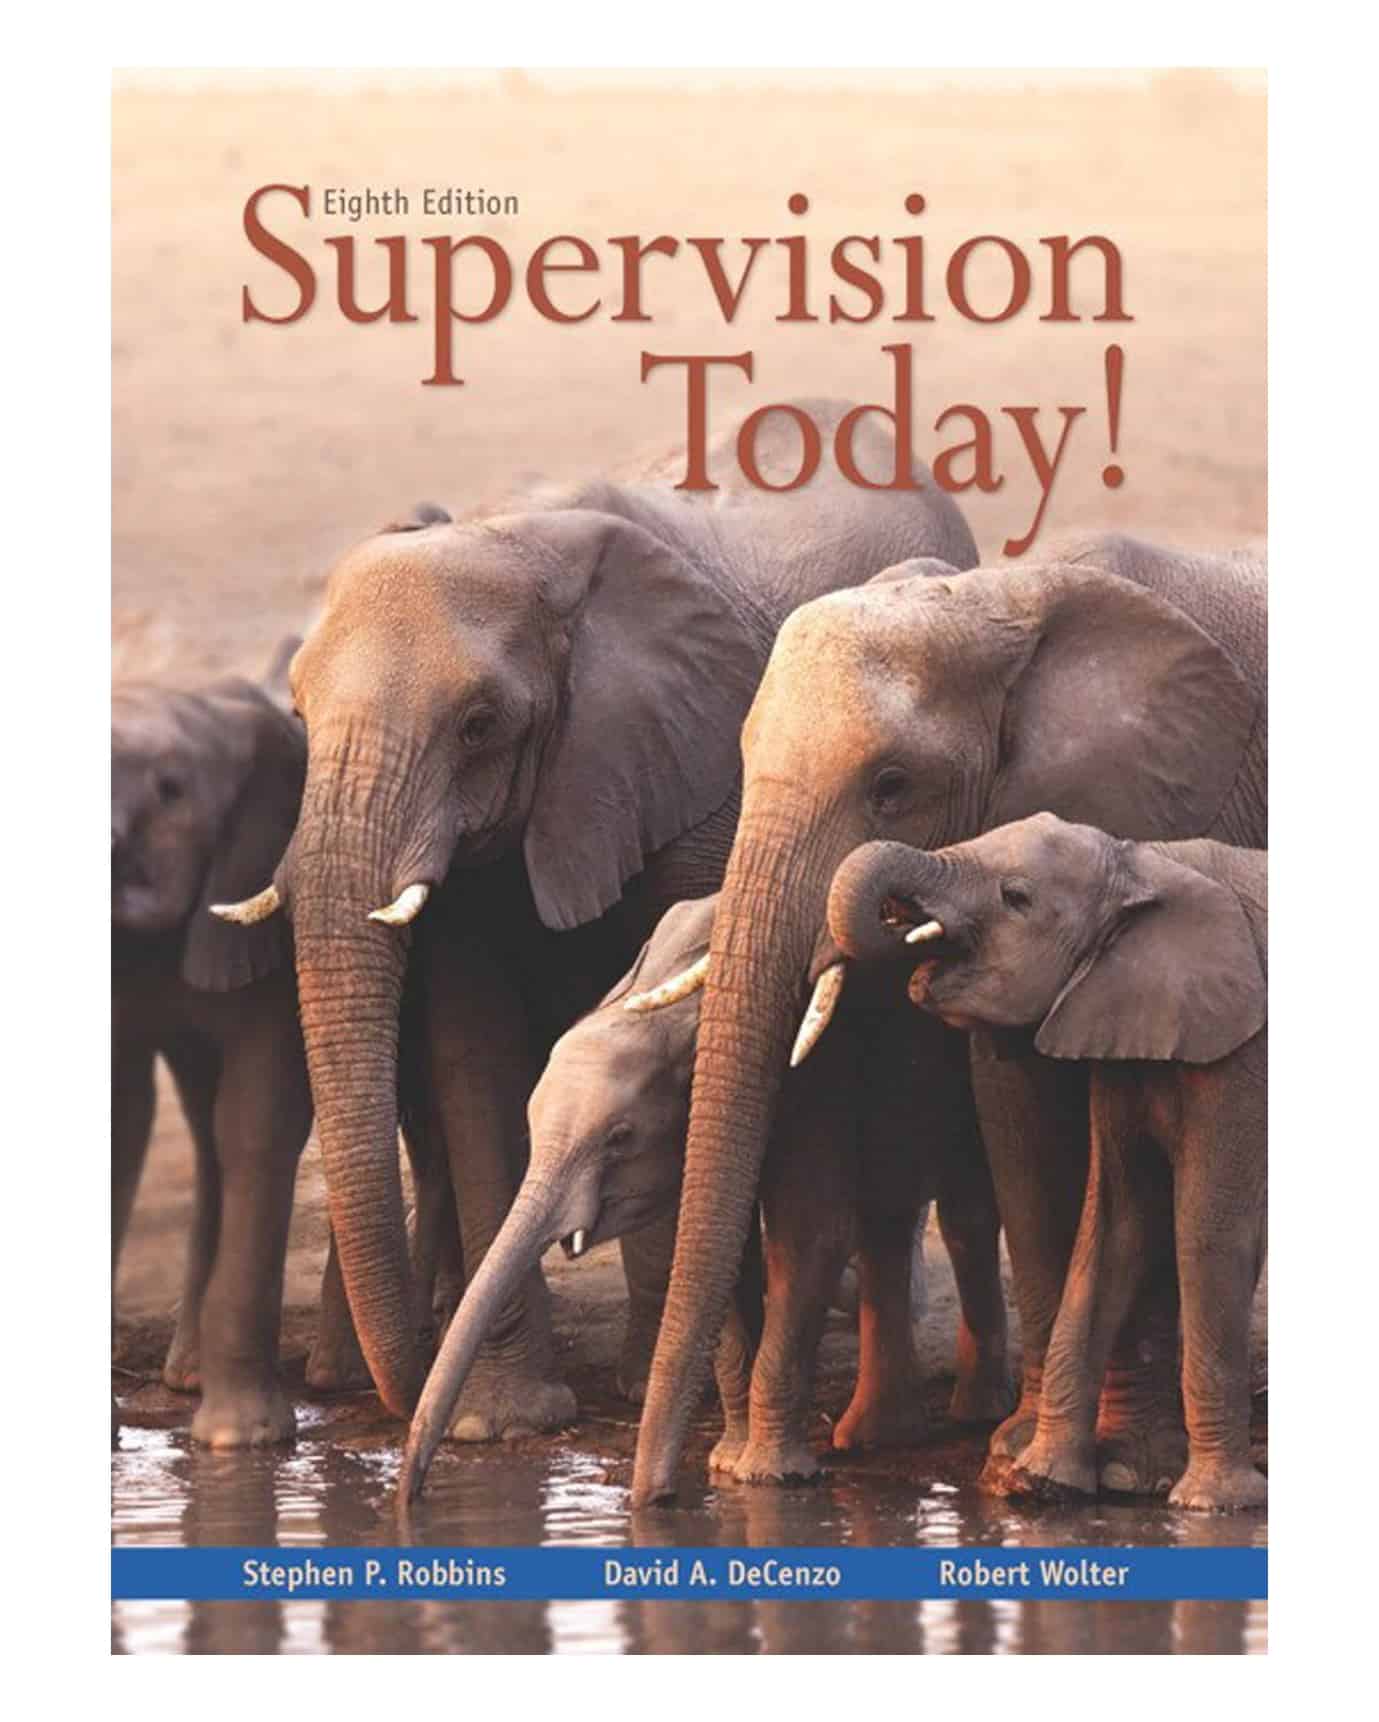 Supervision Today! (8th Edition) - eBook